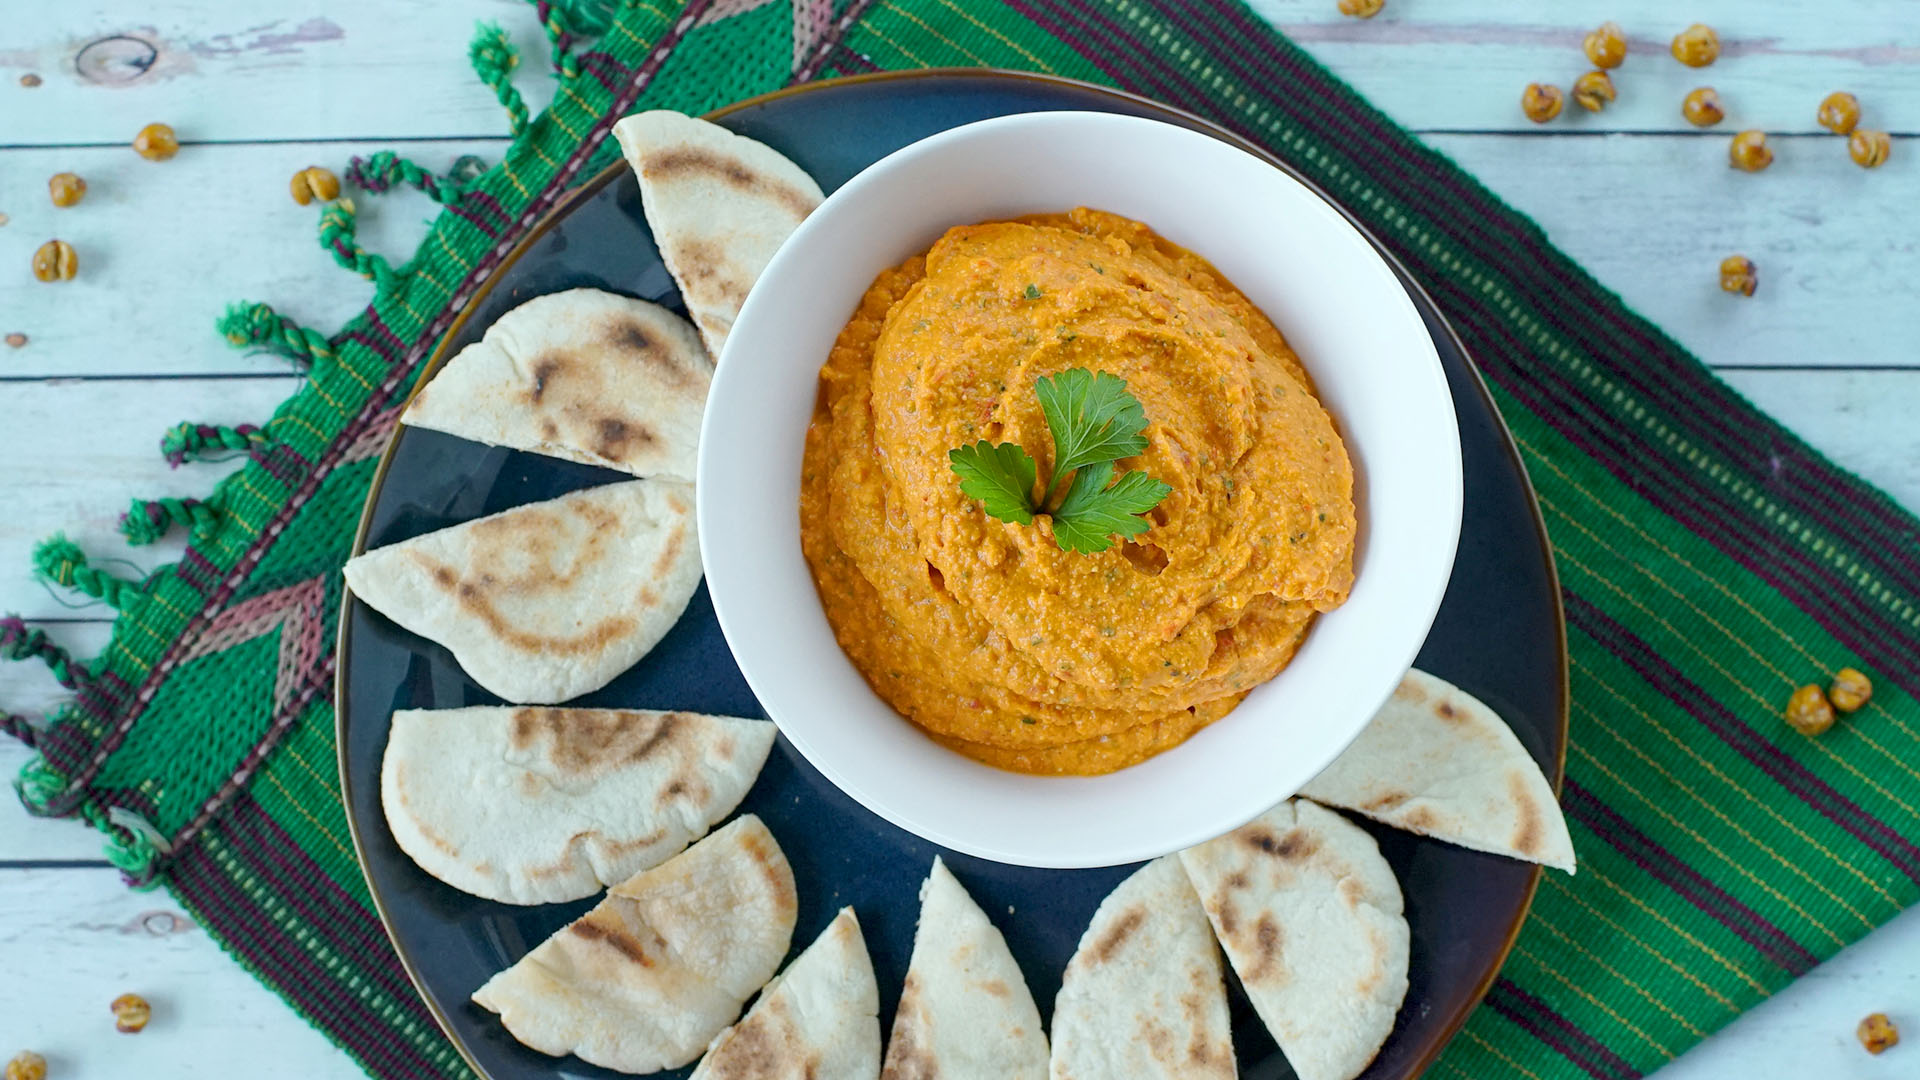 Spicy Roasted Red Pepper and Feta Hummus